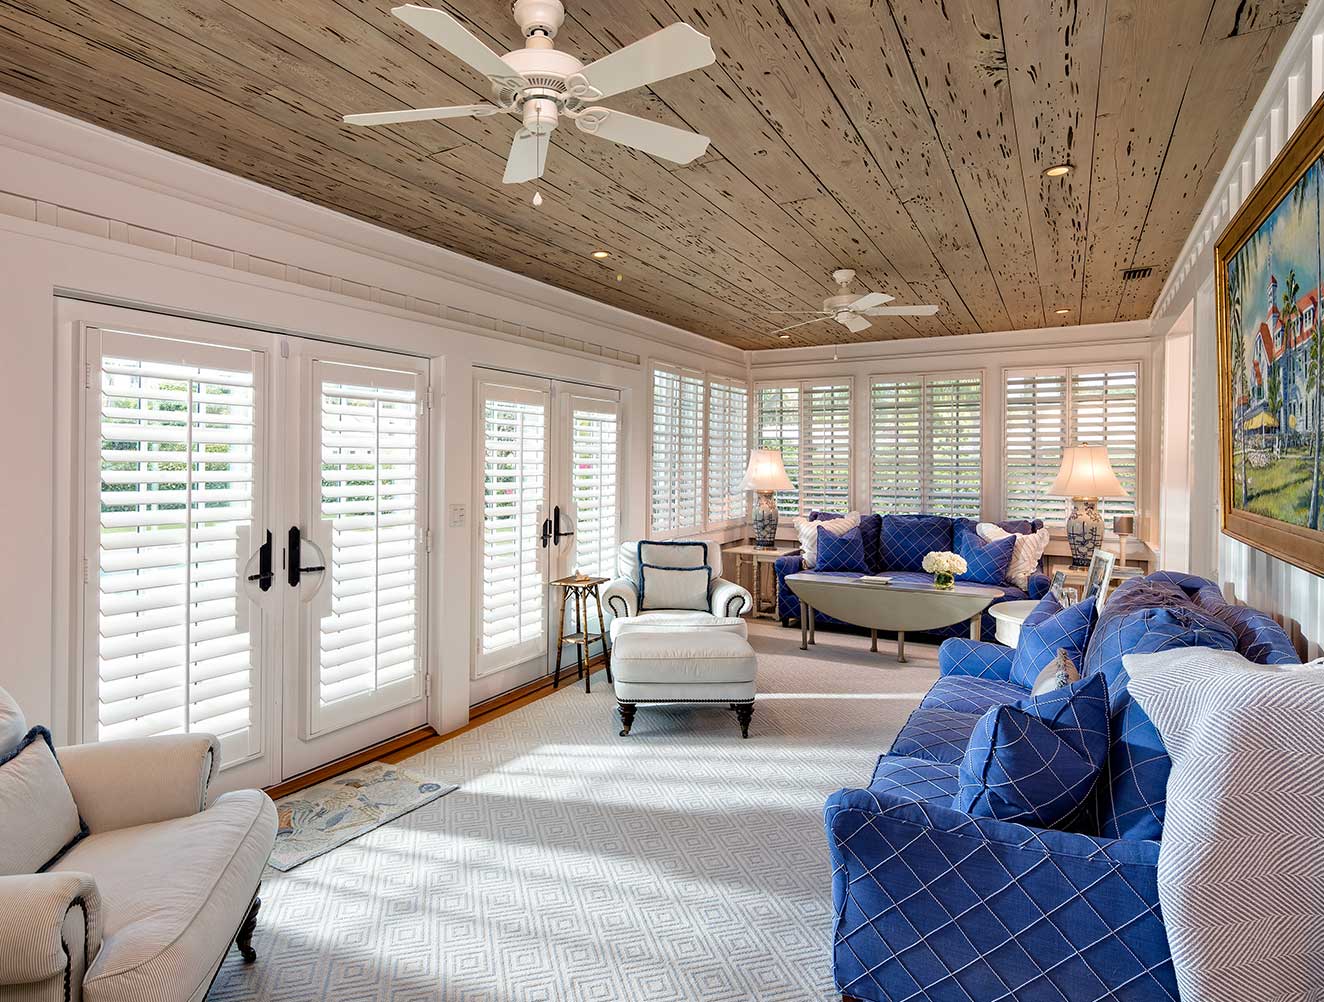 Coastal Florida sun room with crown molding and decorative wood panel ceiling